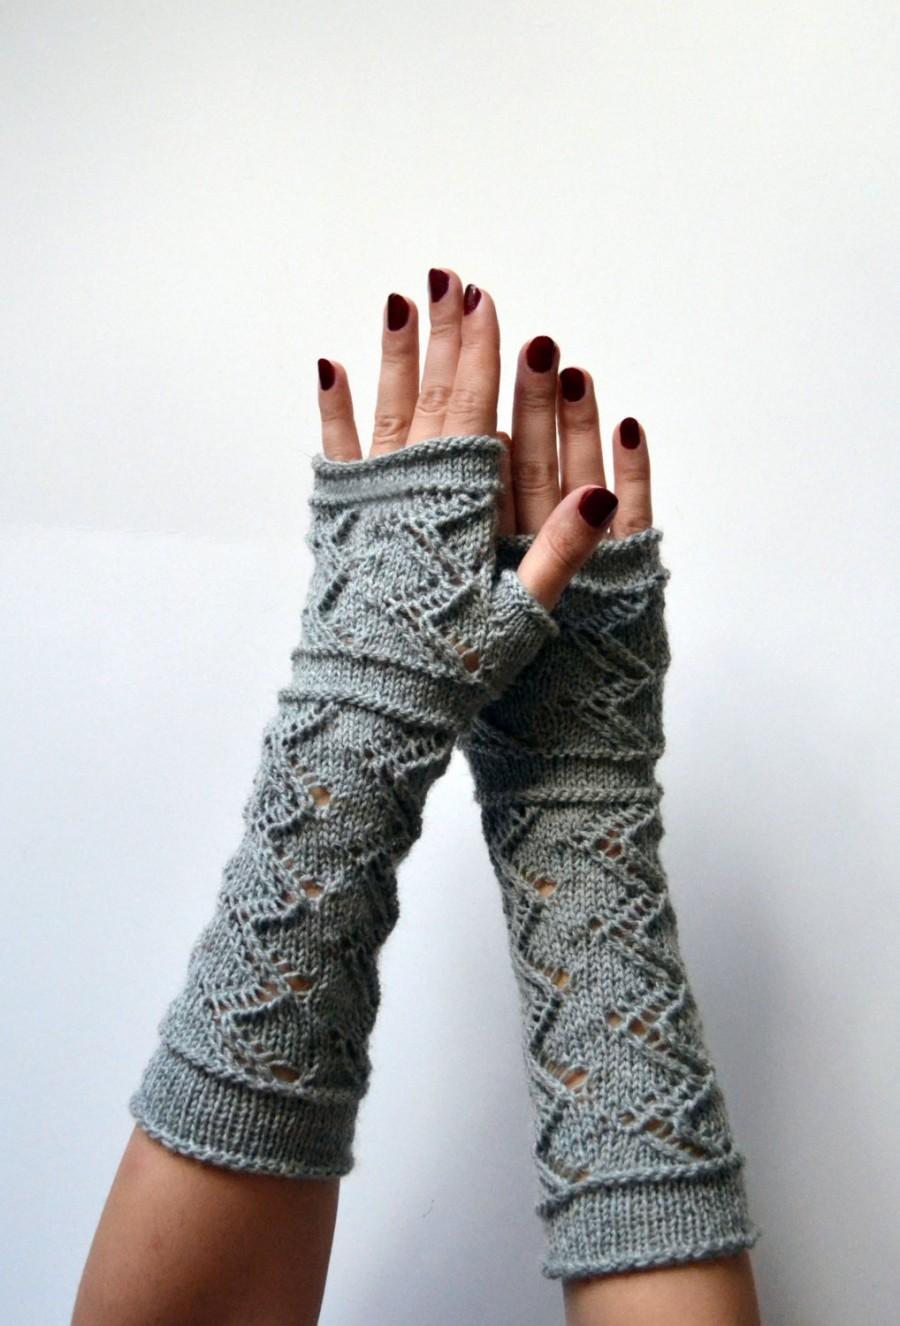 Mariage - Gray Lace Knit Fingerless Gloves - Lace Fingerless Gloves - Winter Gloves - Gray Lace Gloves - Luxurious Christmas Gift nO 101.